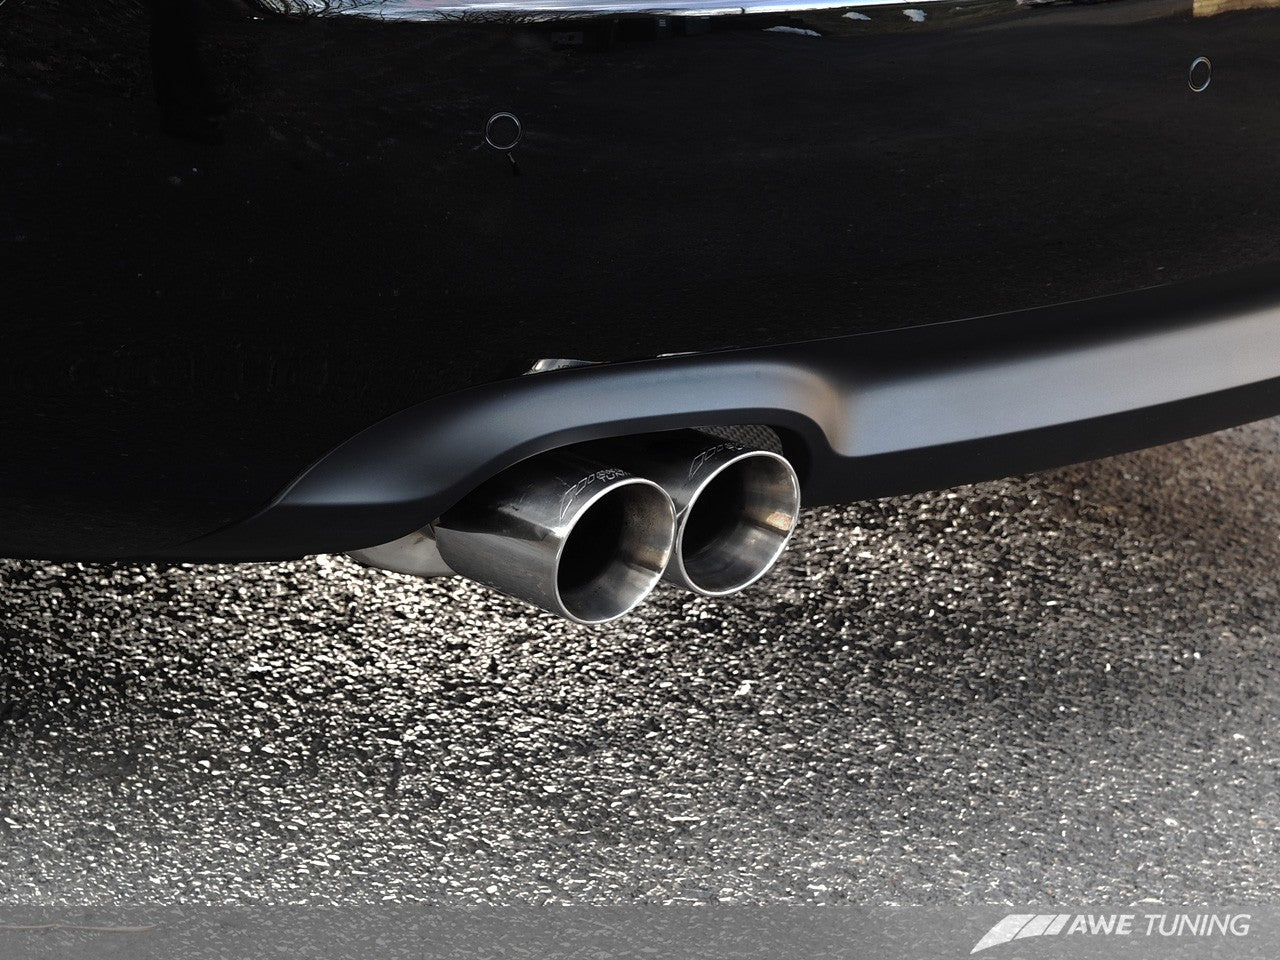 AWE Touring Edition Exhaust for B8 A5 2.0T - Motorsports LA